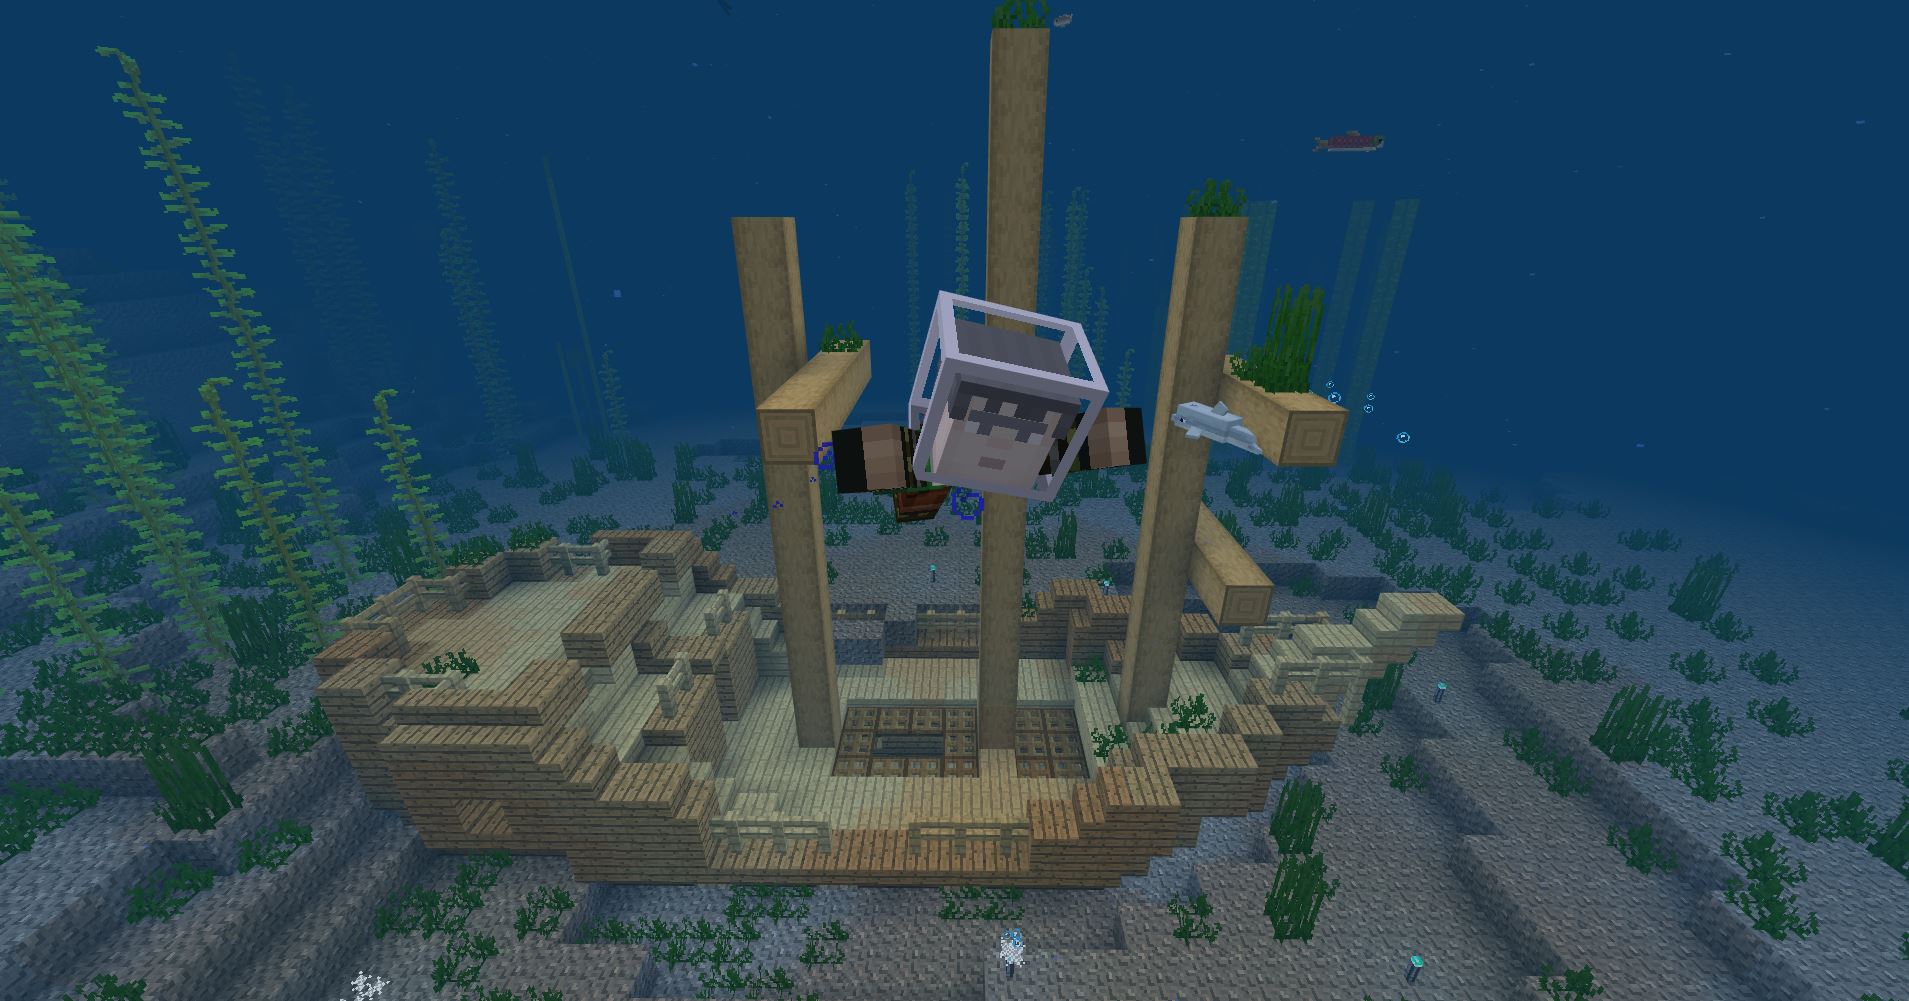 Minecraft: Explore the Depths of the Ocean (Virtual/Online)